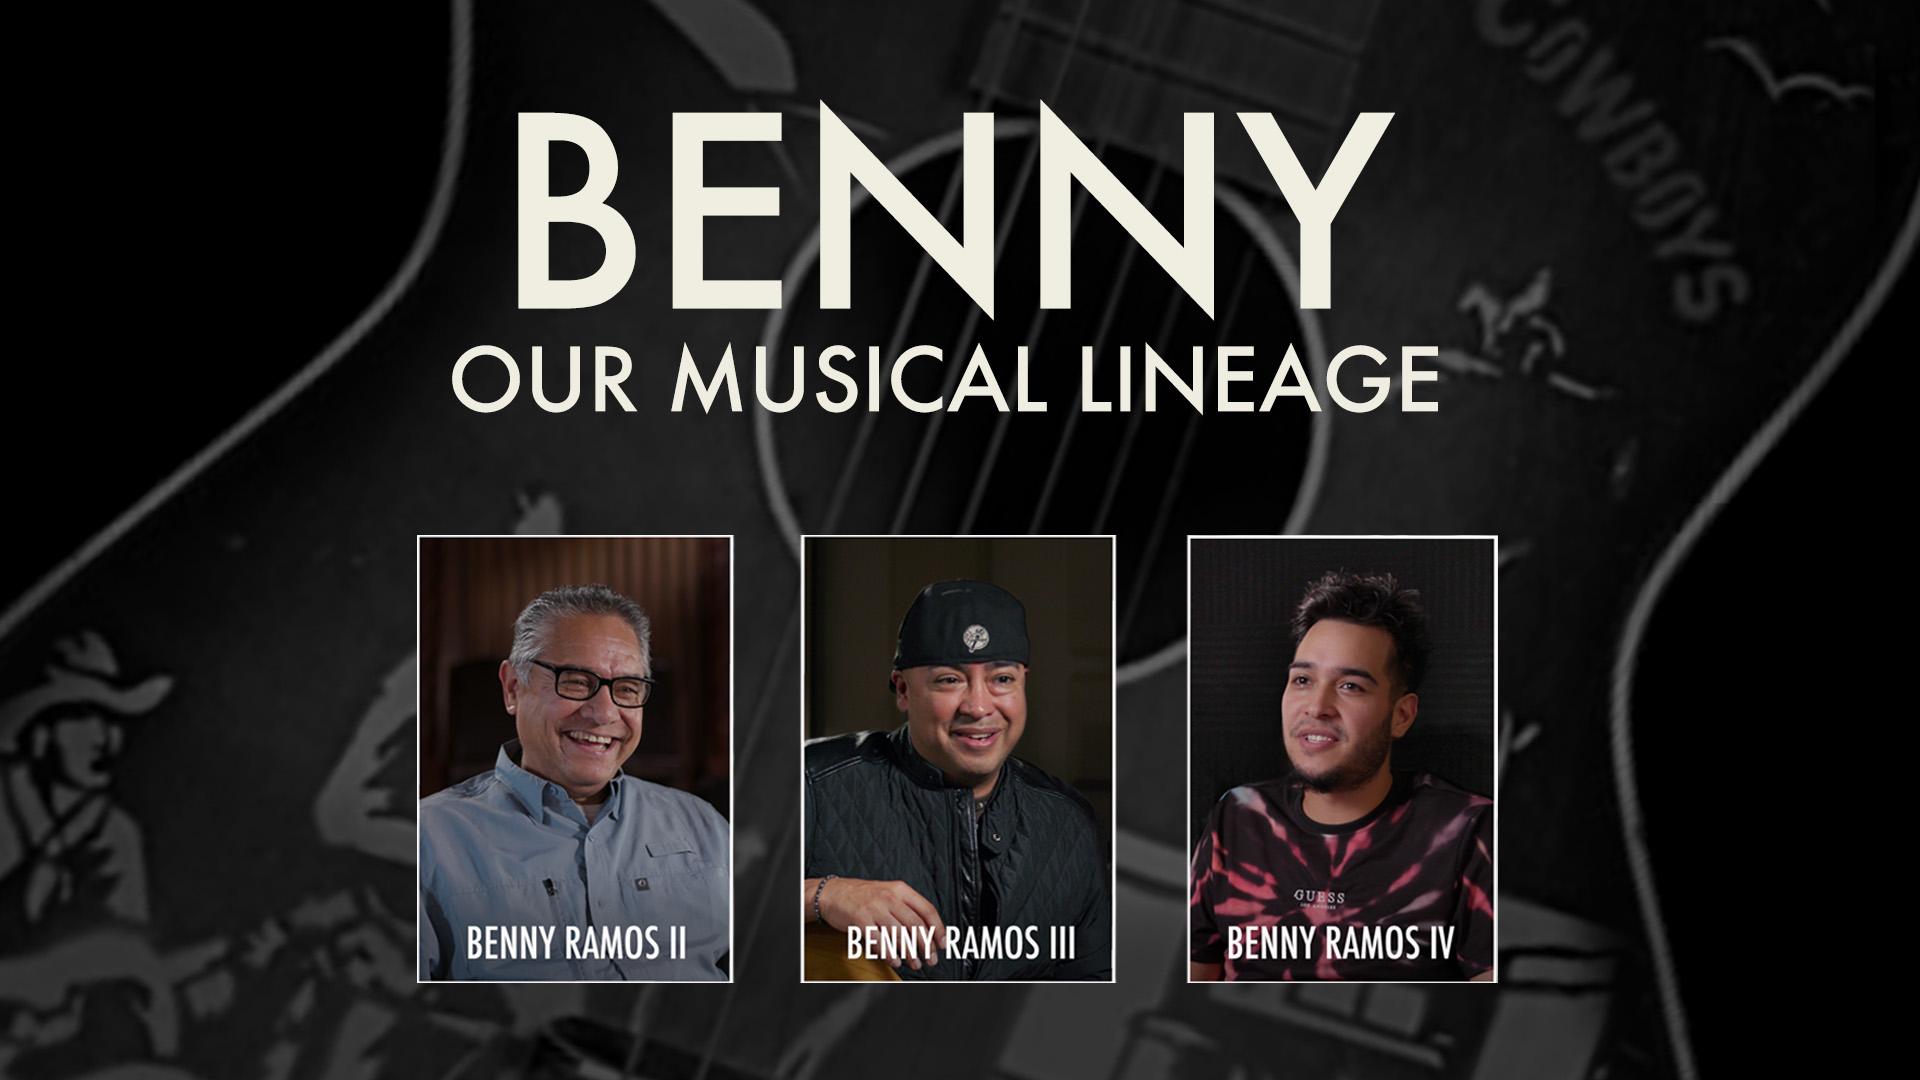 BENNY: Our Musical Lineage